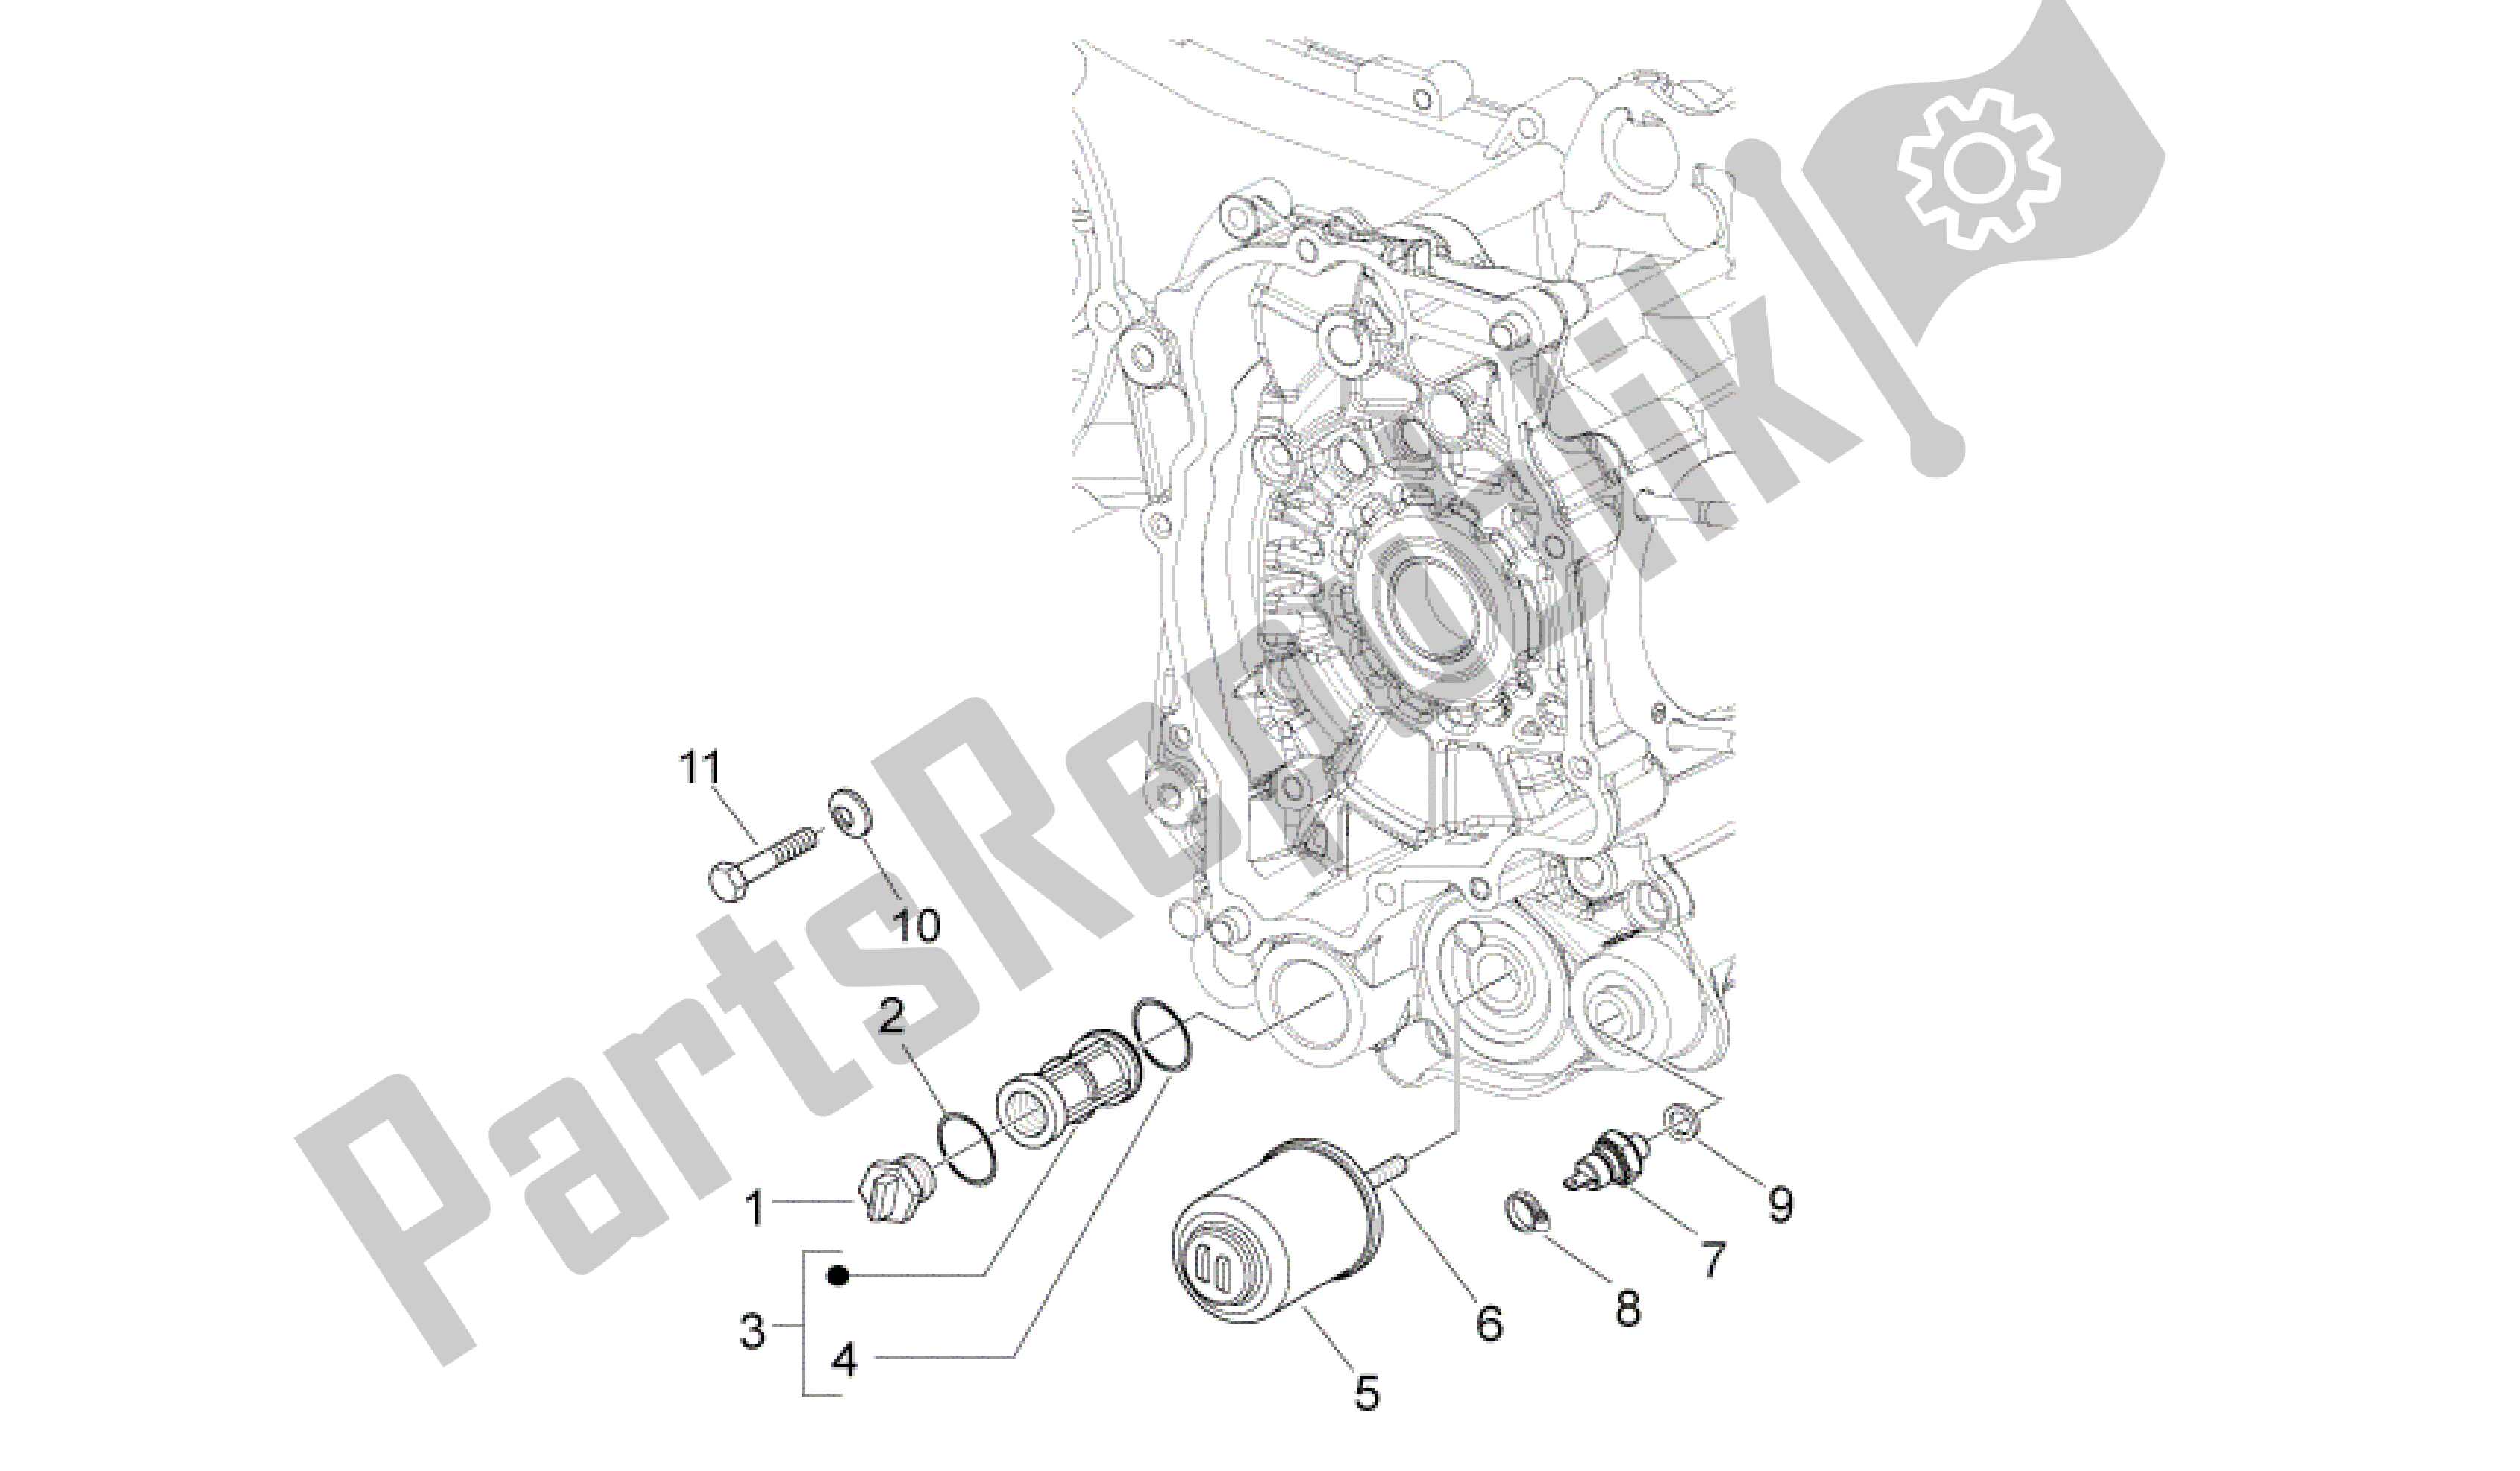 All parts for the Oil Filter of the Aprilia Sport City 125 2008 - 2010